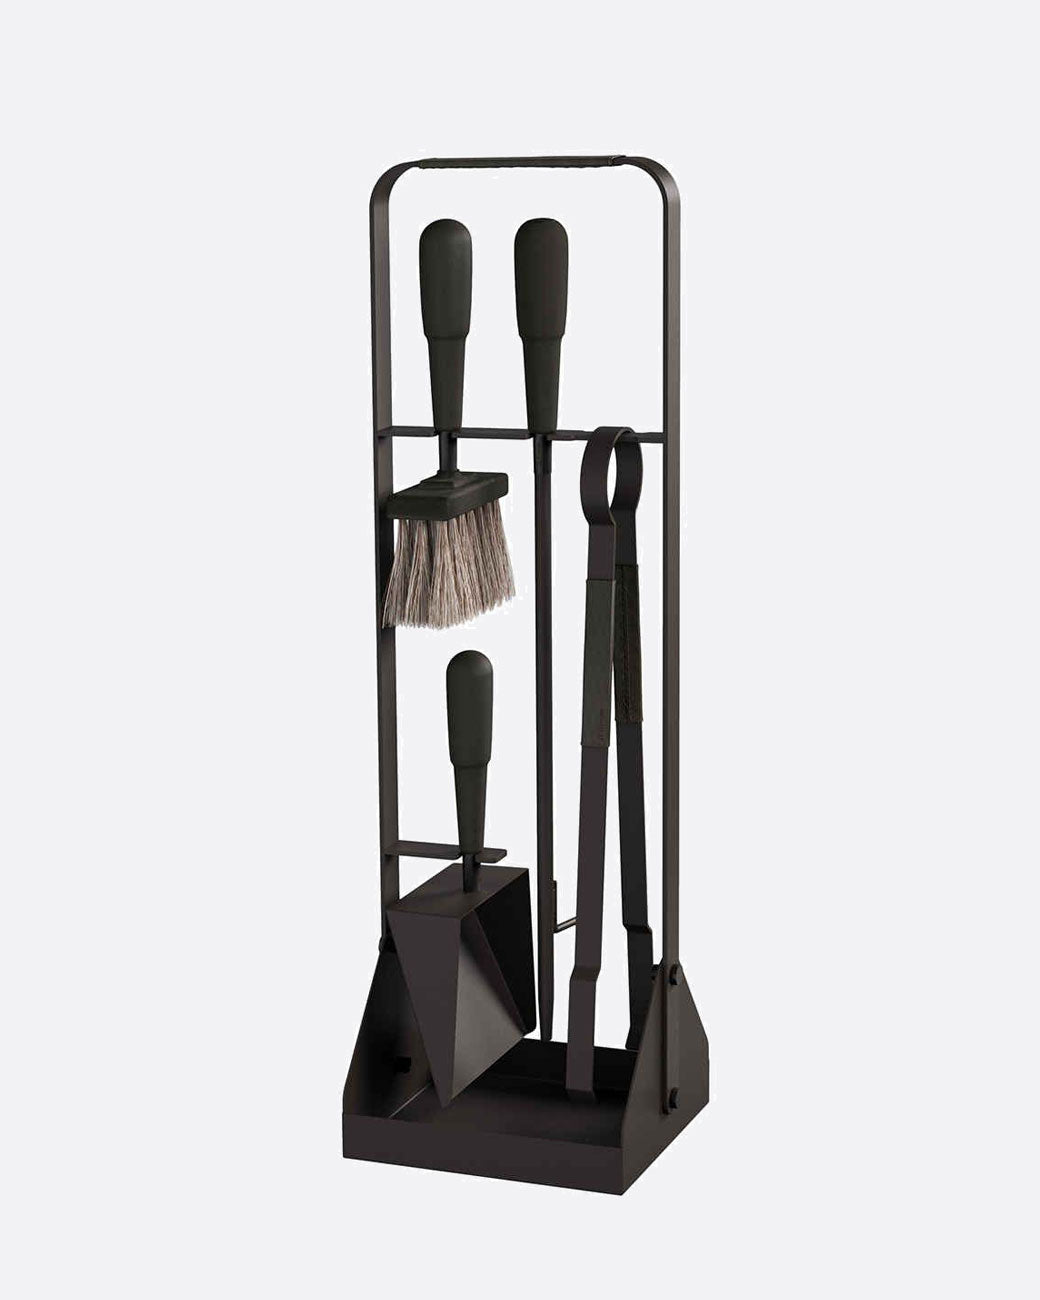 black fireplace set with four pieces hanging on the frame. there are black leather details on the handles. 